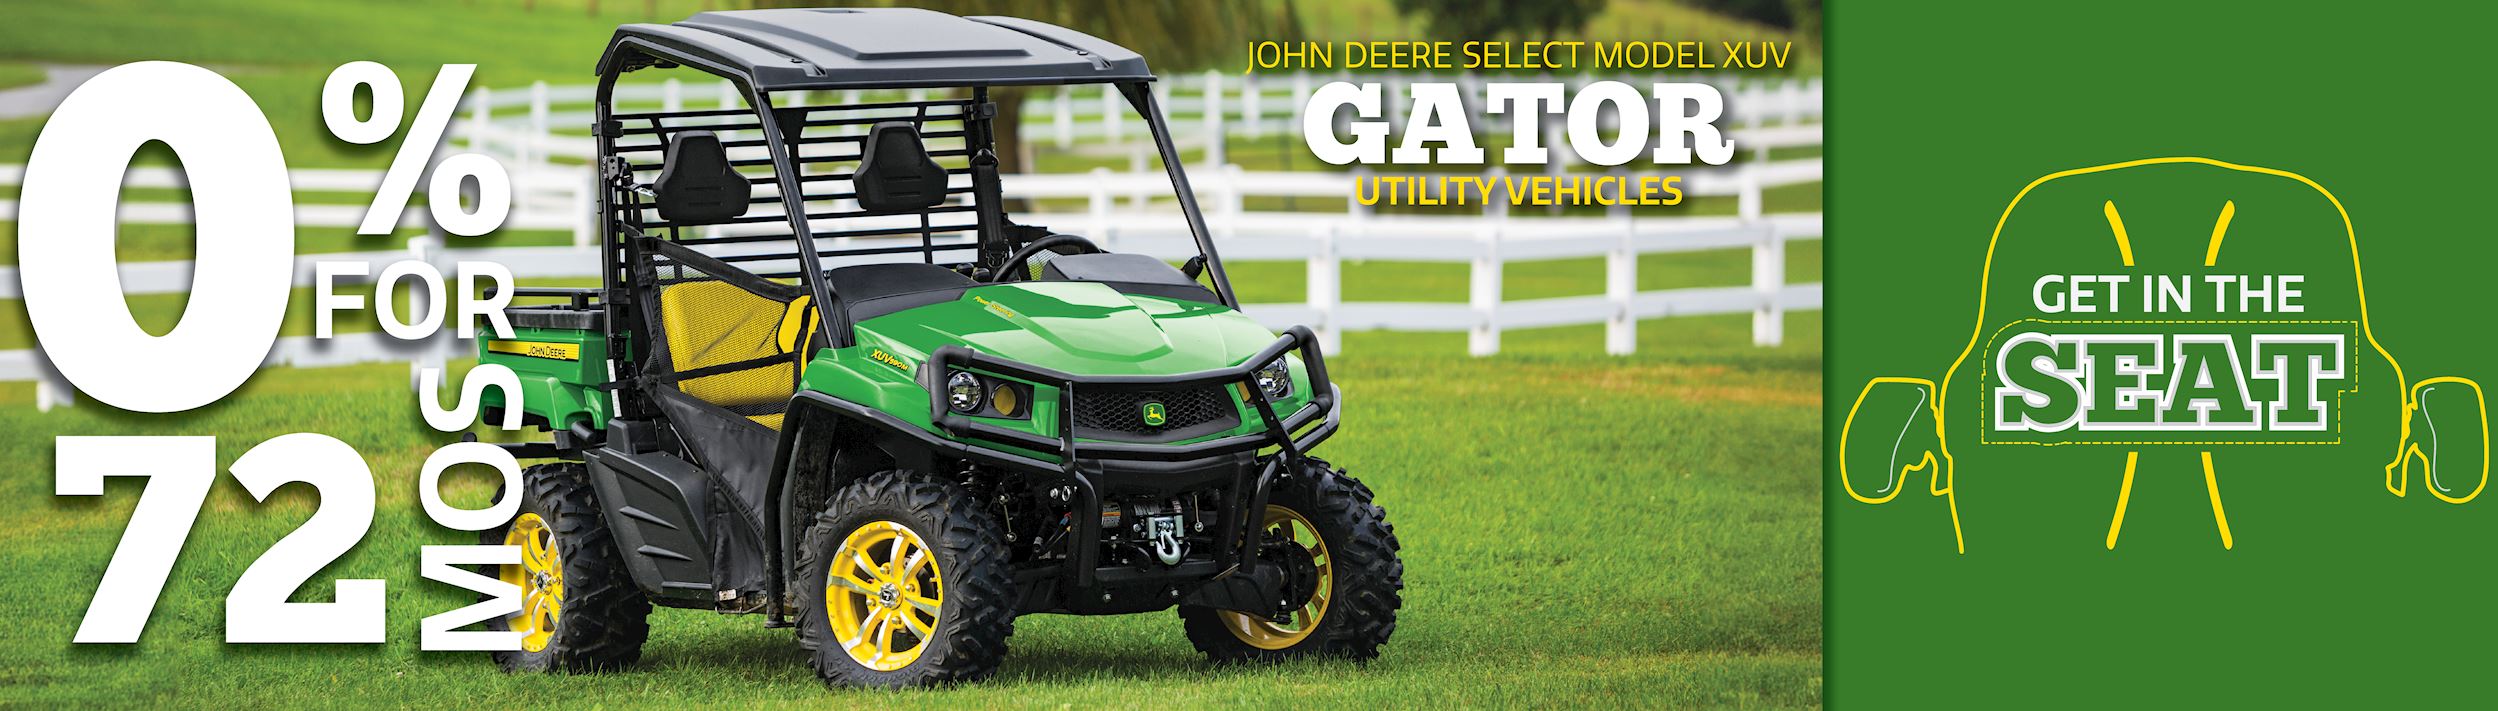 Right now get 0% for 72 months on select Gators!